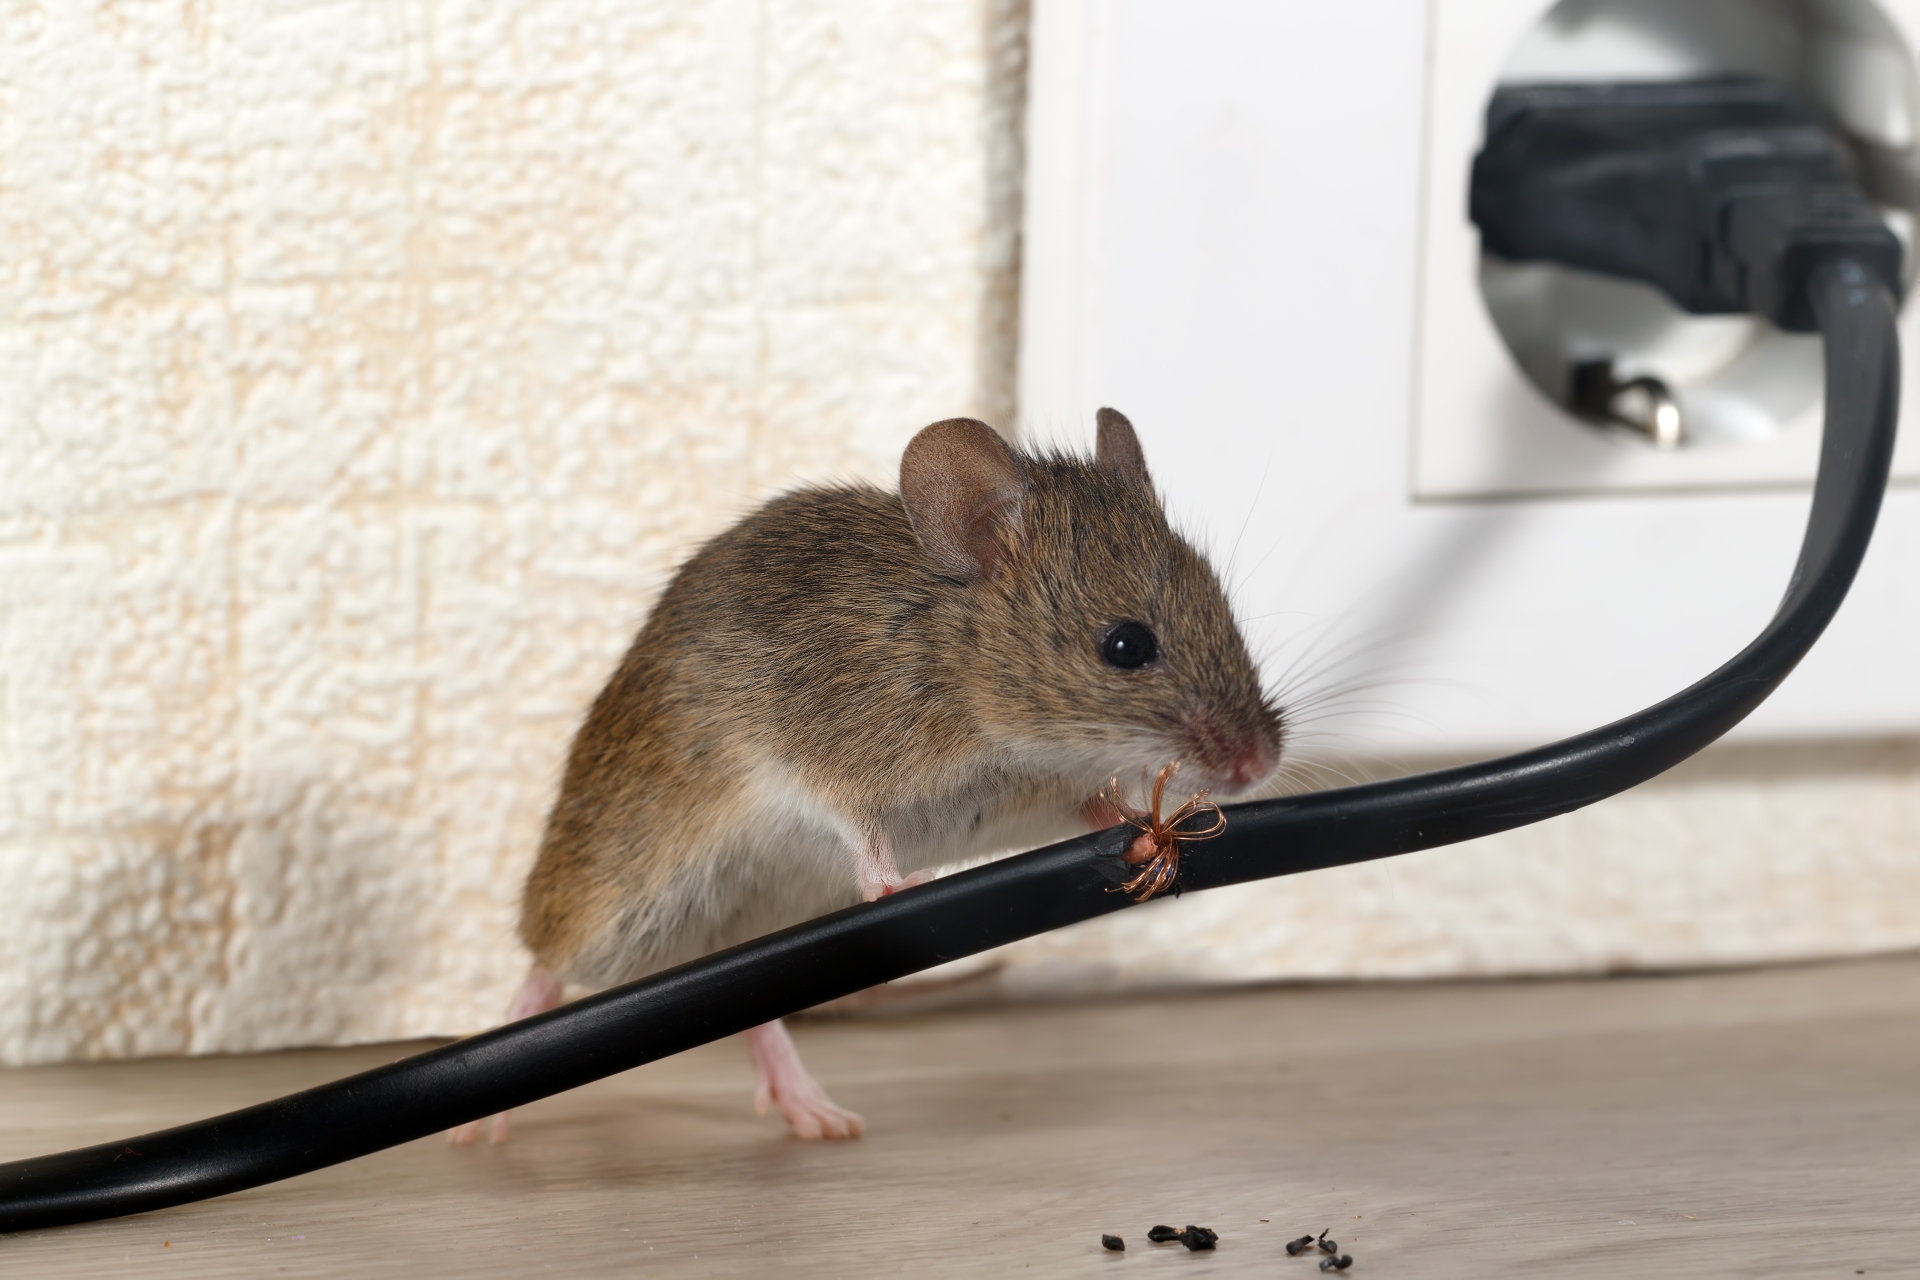 Mice Infestation, Pest Control in Poplar, Isle of Dogs, Millwall, E14. Call Now 020 8166 9746